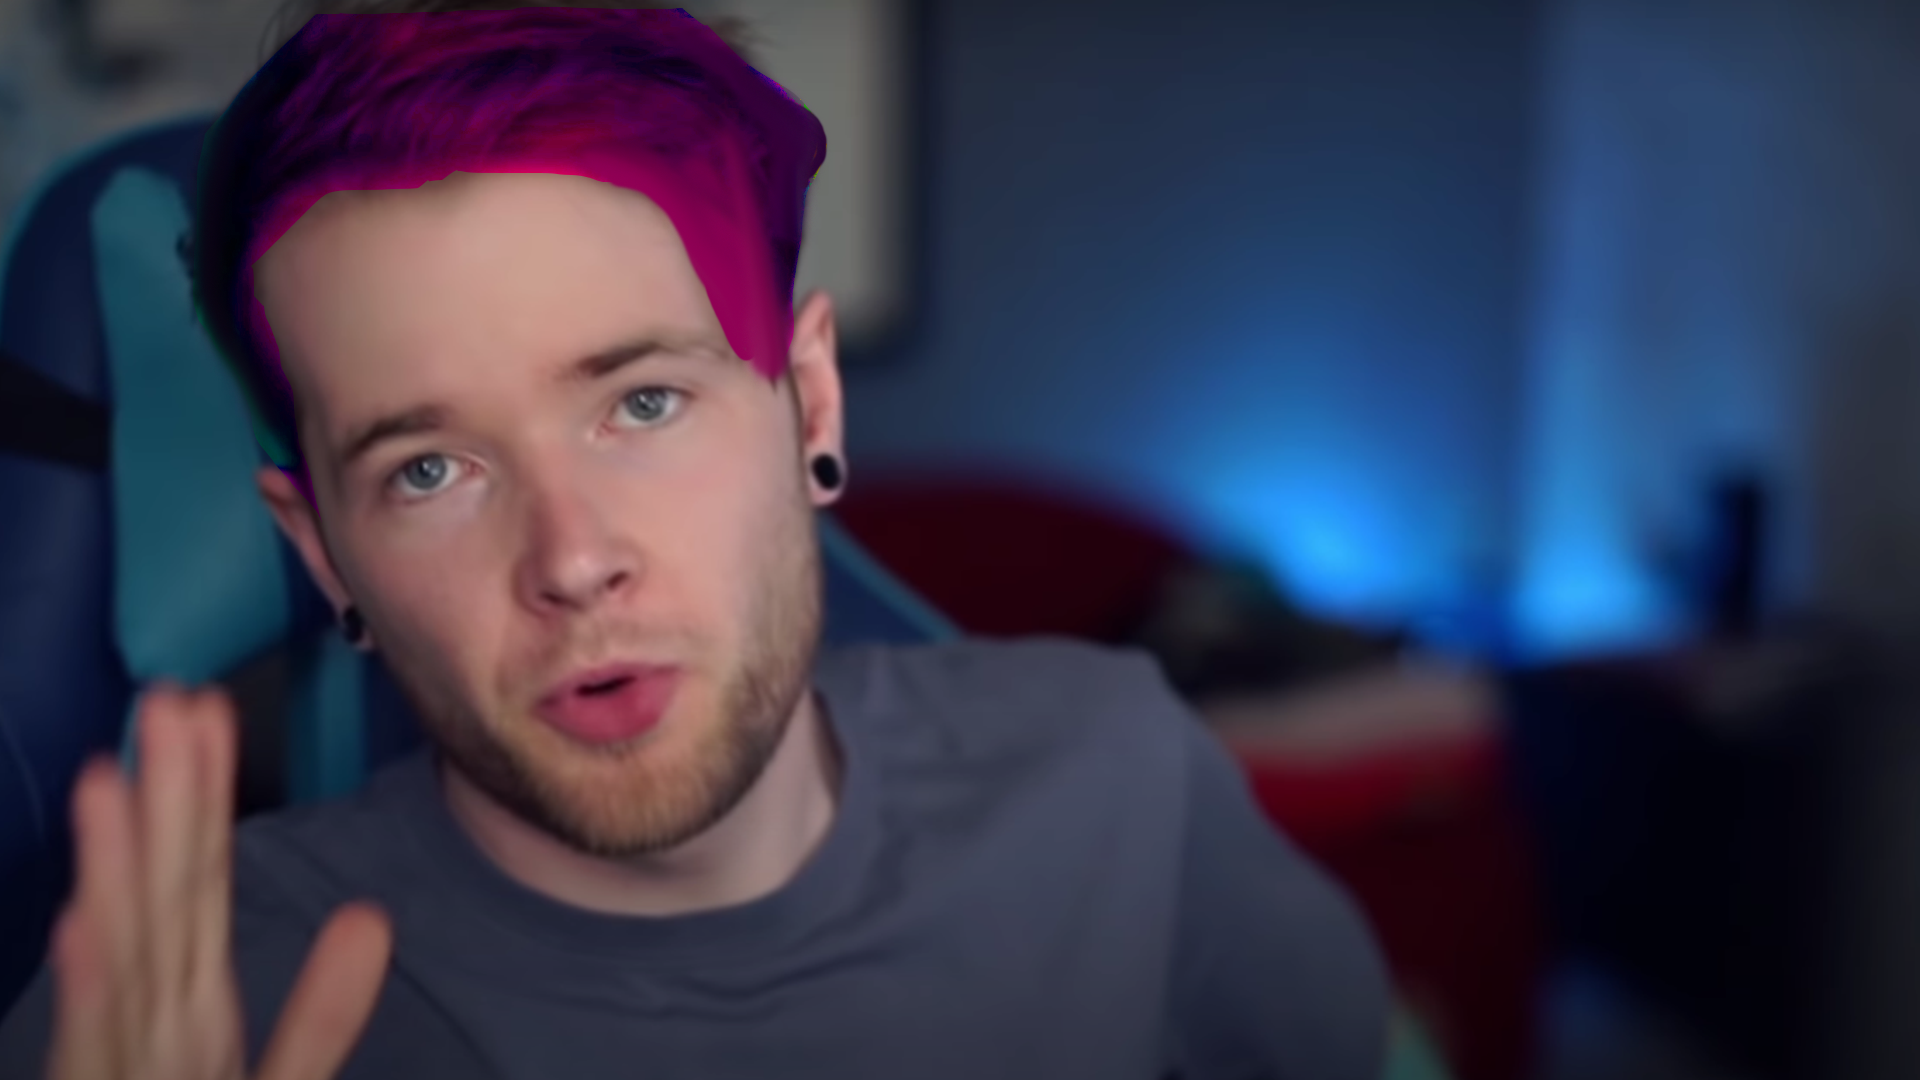 2. How to Get Dantdm's Iconic Pink and Blue Hair - wide 6